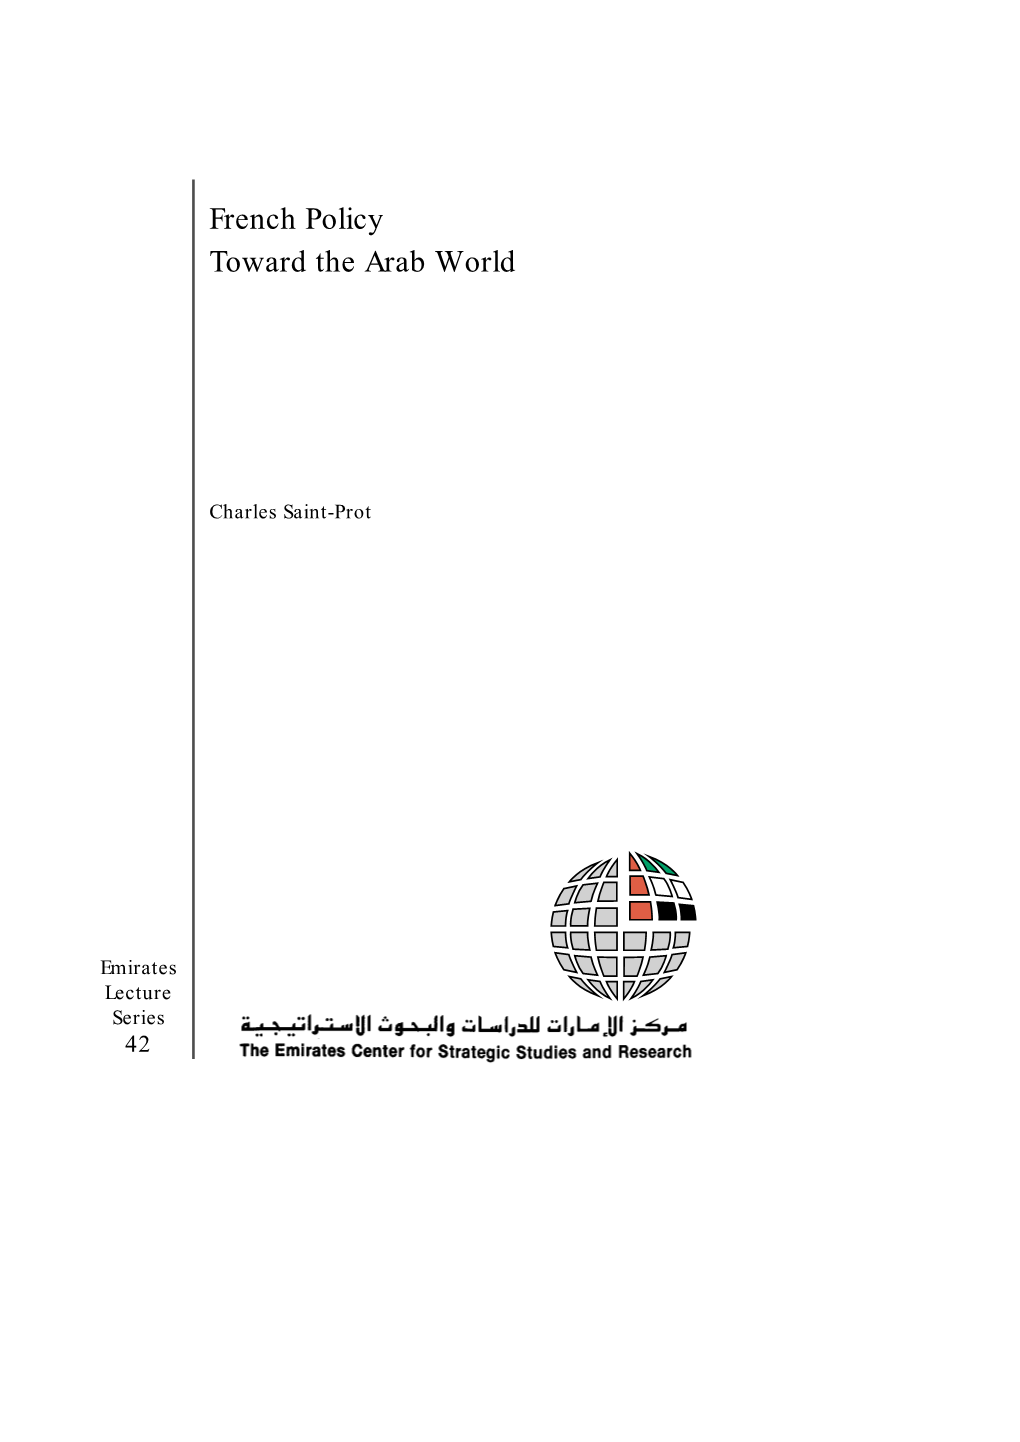 French Policy Toward the Arab World